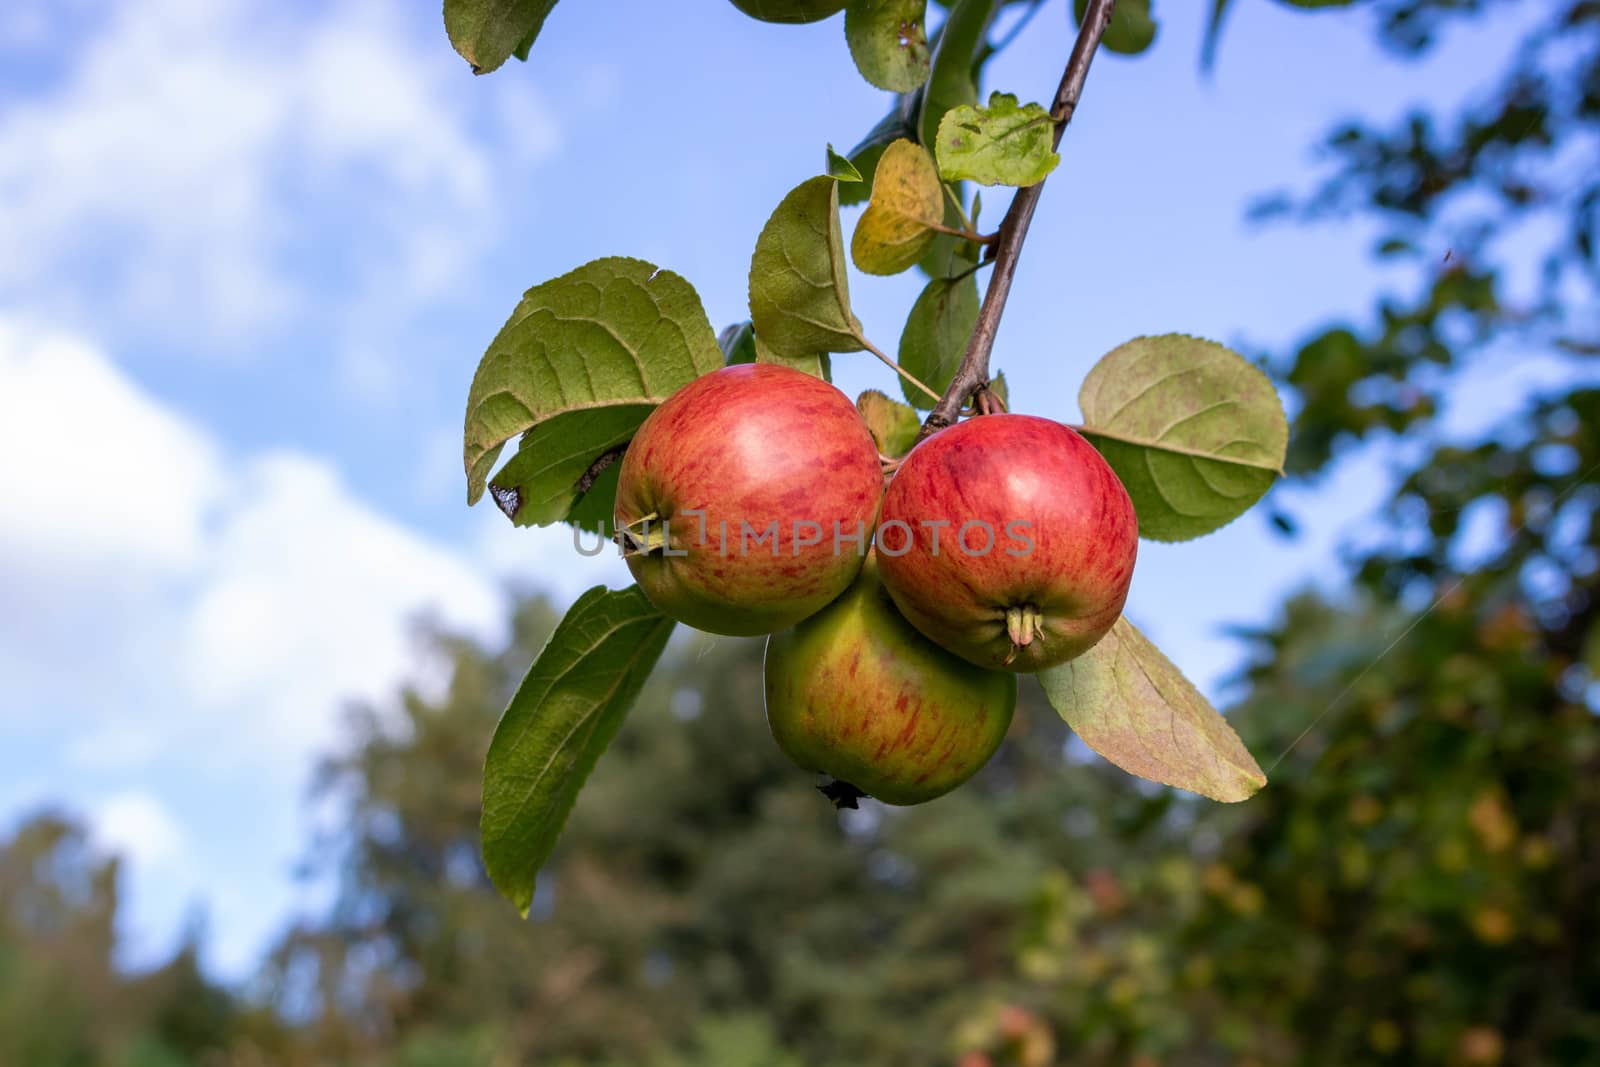 Three shiny delicious apples hanging from a tree branch in an Apple orchard against the sky on a Sunny autumn day by lapushka62